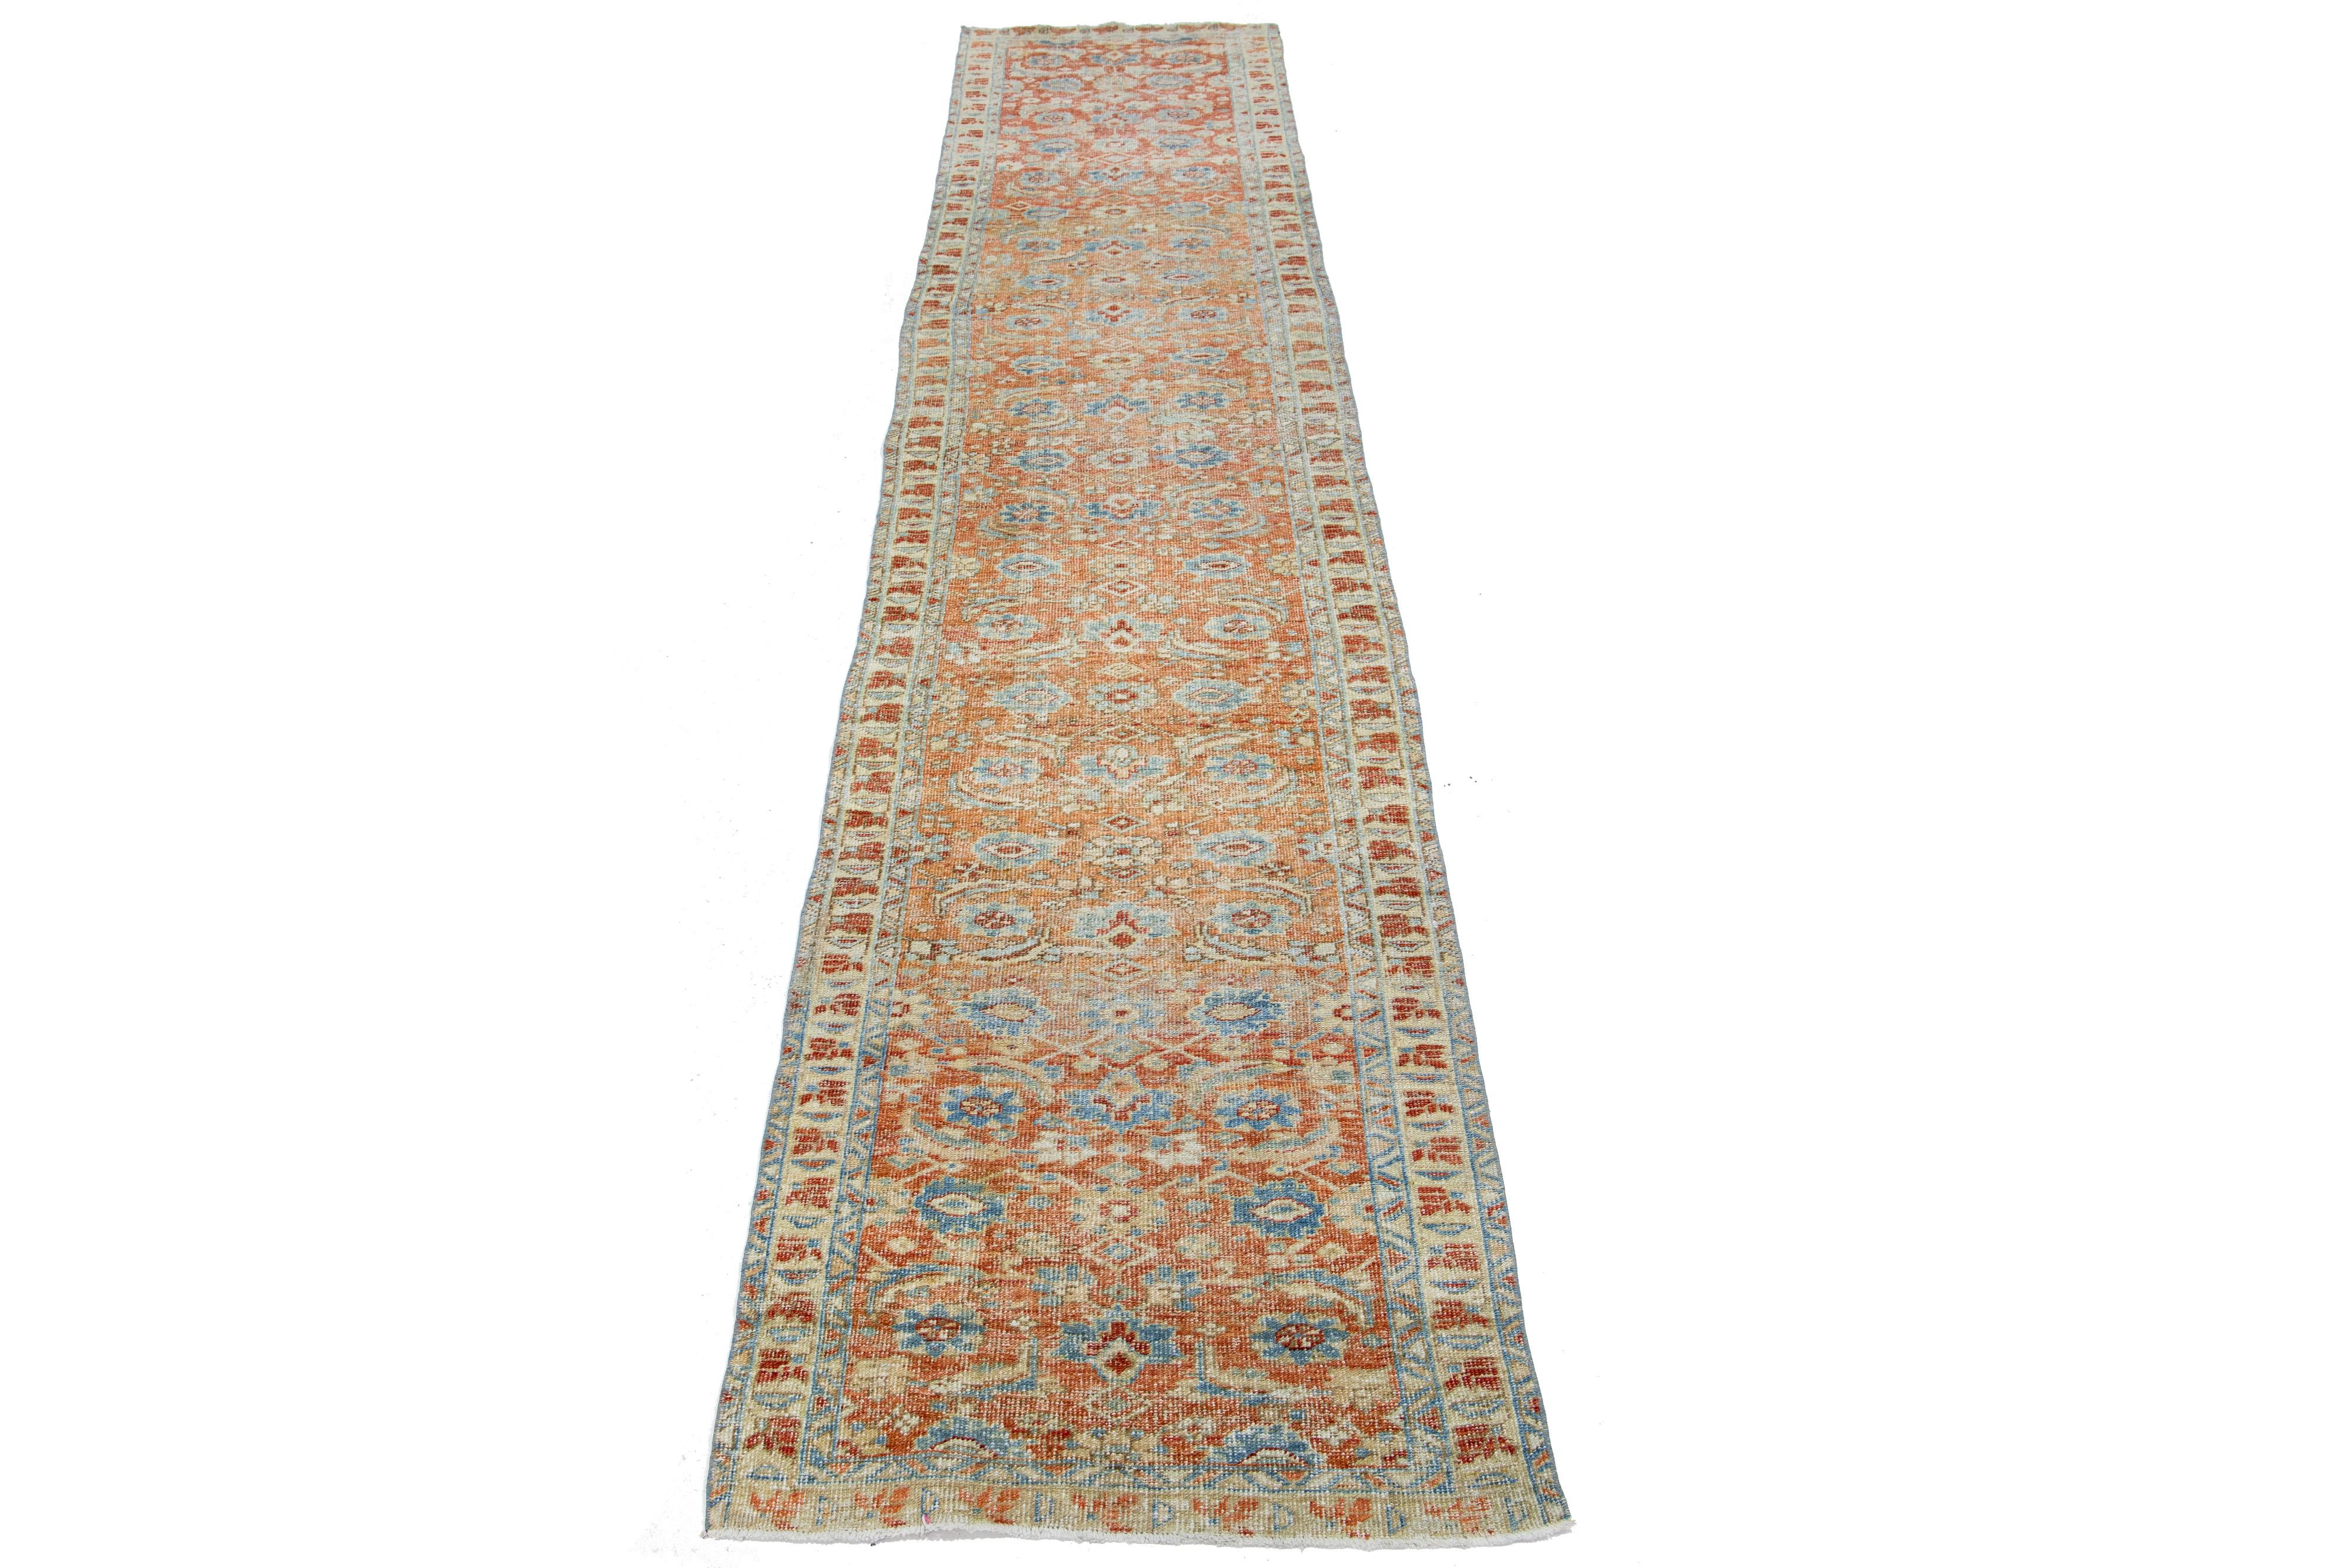 Beautiful 20th-century Heriz hand-knotted wool runner with a rust-colored field. This Piece has blue accents in a gorgeous tribal design.

This rug measures 3' x 14'2